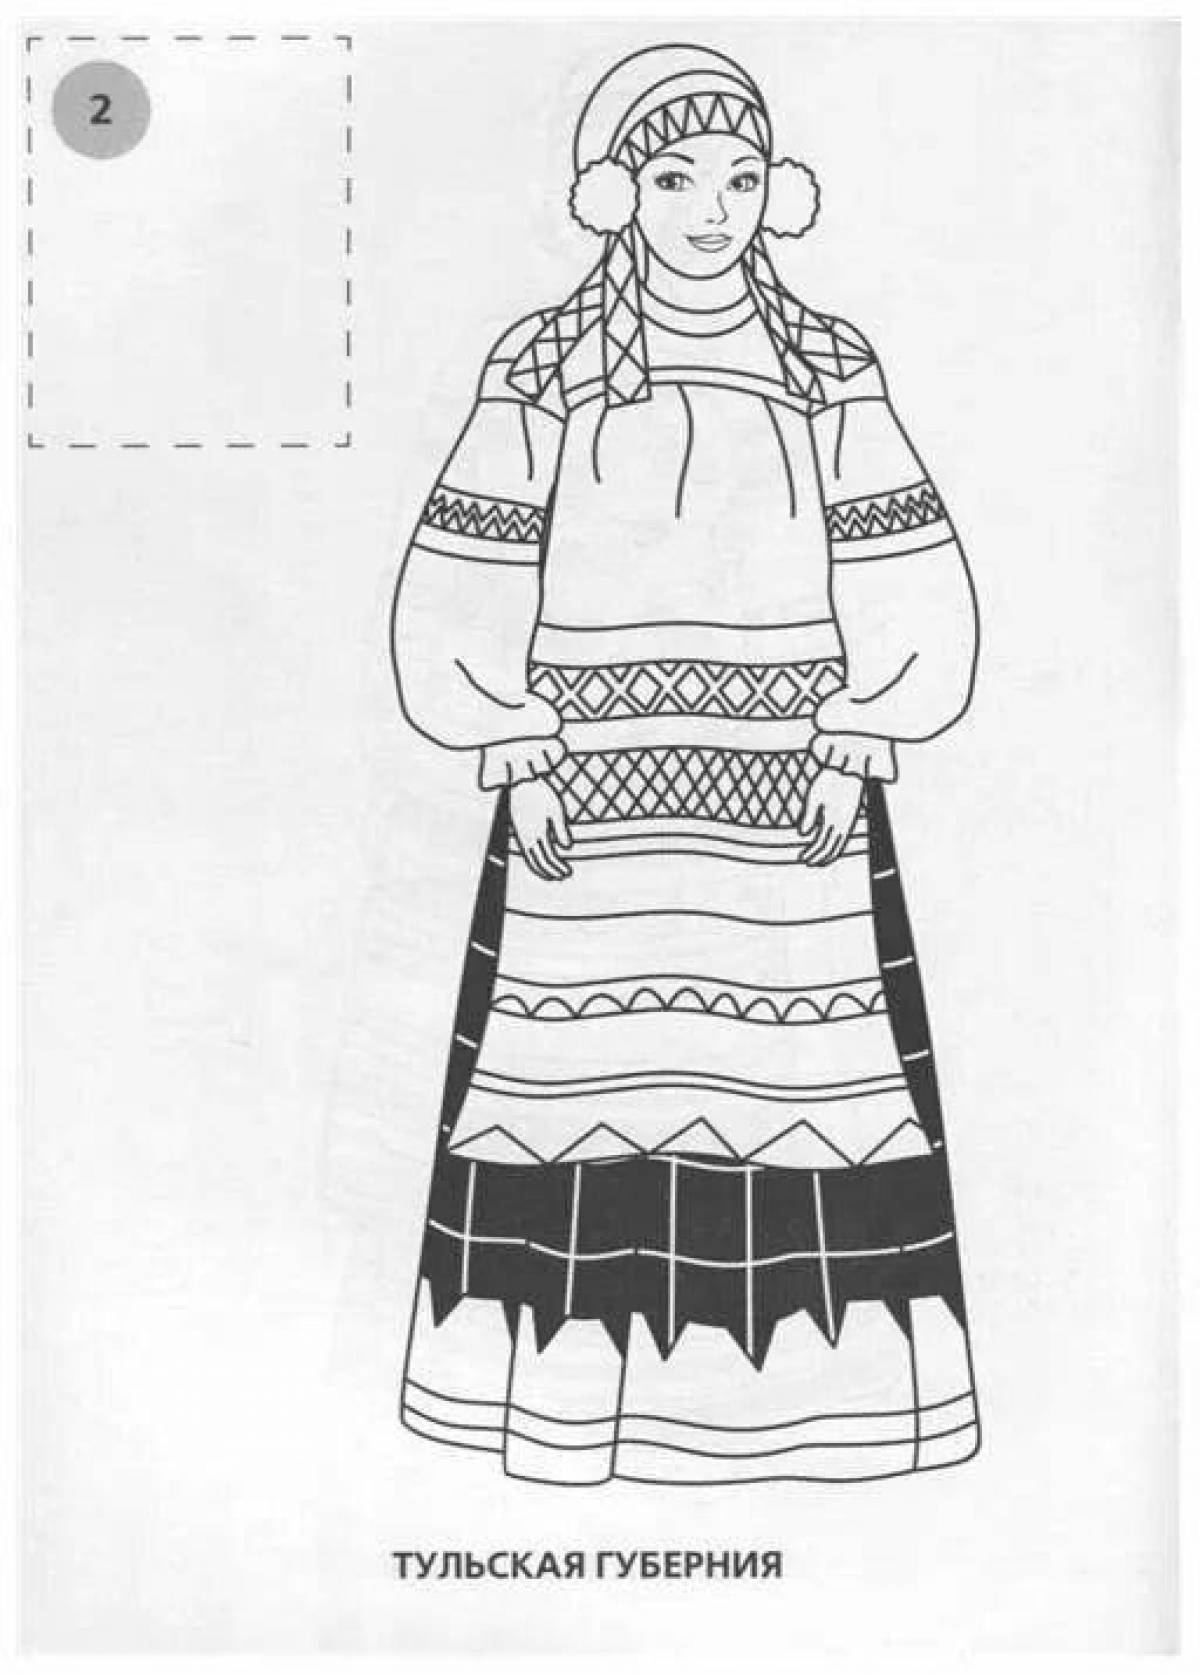 Coloring book cheerful Russian costume